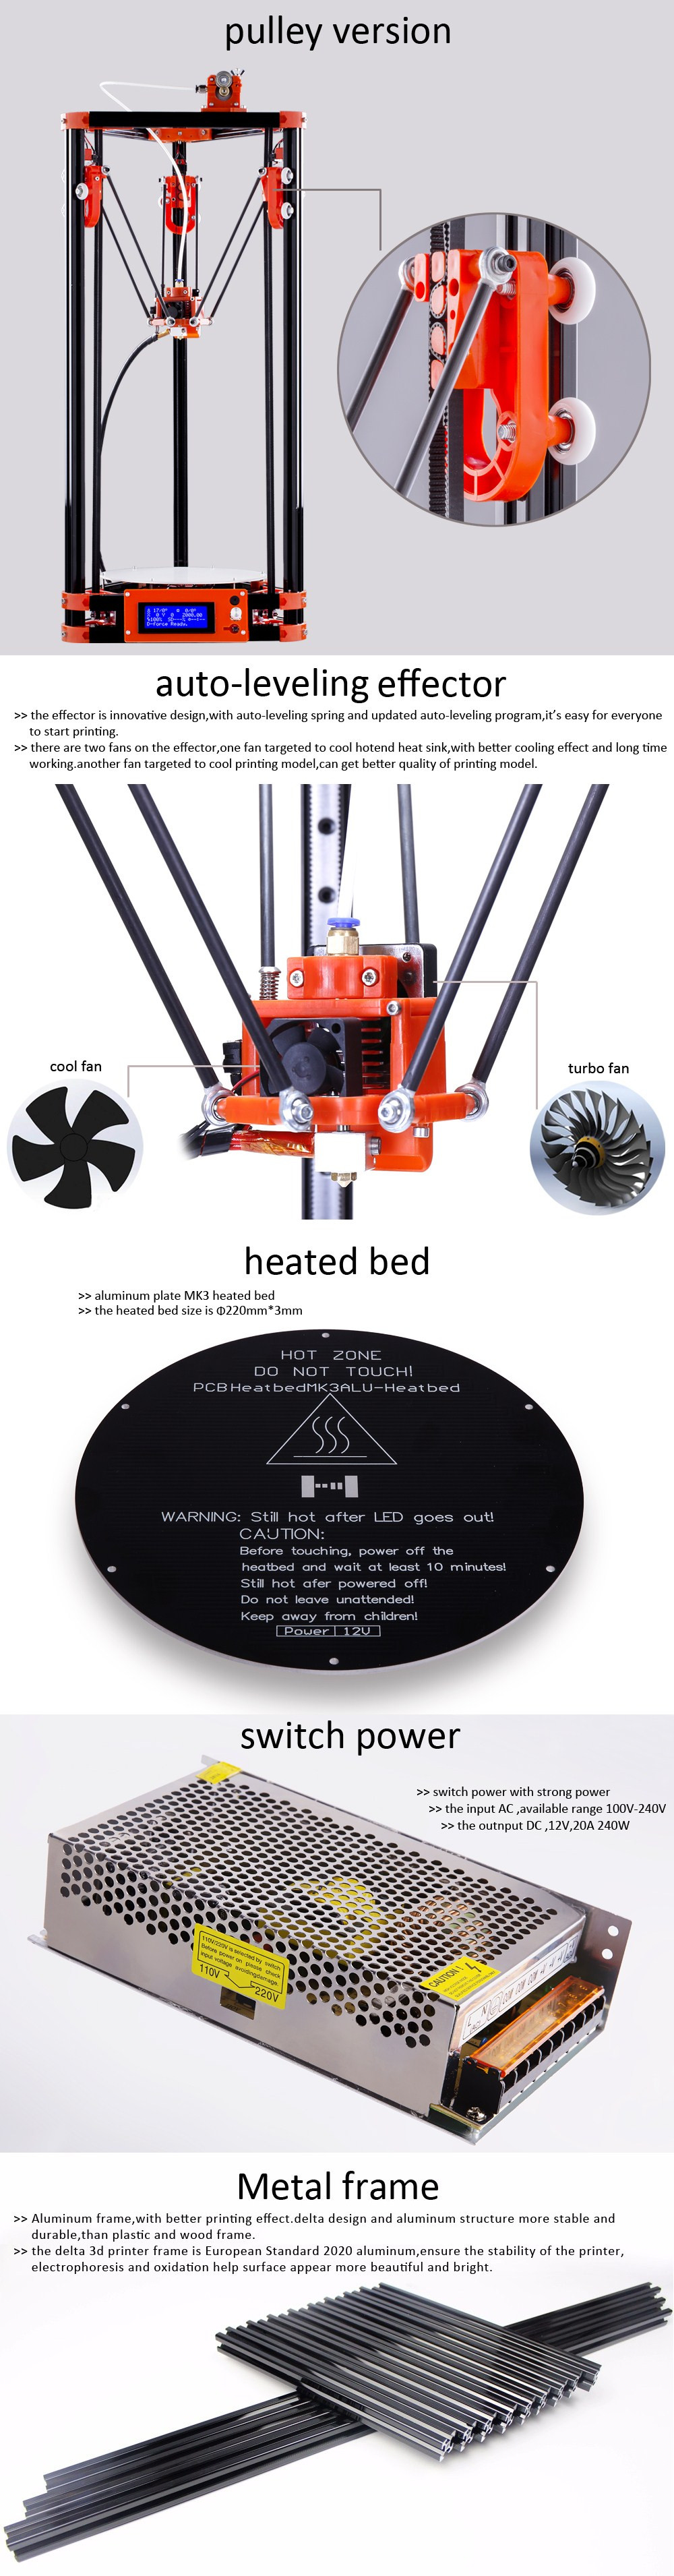 FLSUN® Delta Kossel 3D Printer 180*315mm Printing Size With Auto-leveling Dual Cooling Fans Heated Bed 1.75mm 0.4mm Nozzle 10